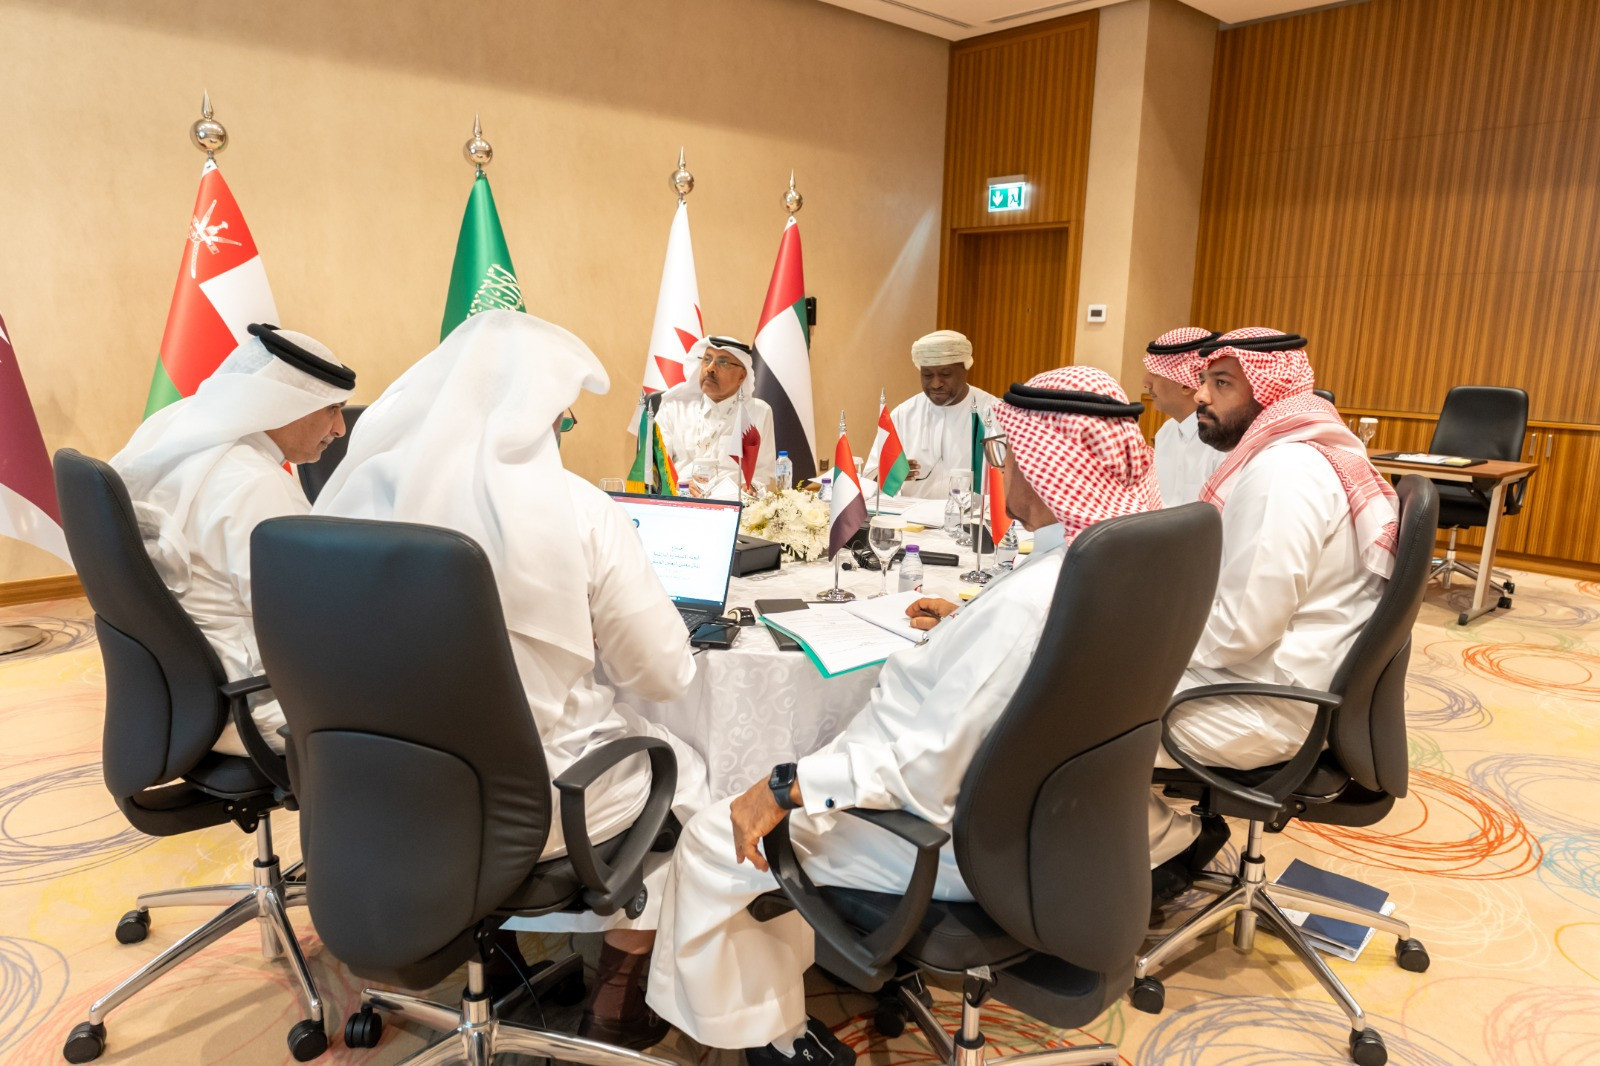 Al-Majid participates at the meeting of the Paralympic Committee of the Gulf Cooperation Council in Riyadh. © BAHRAIN PARALYMPIC COMMITTEE